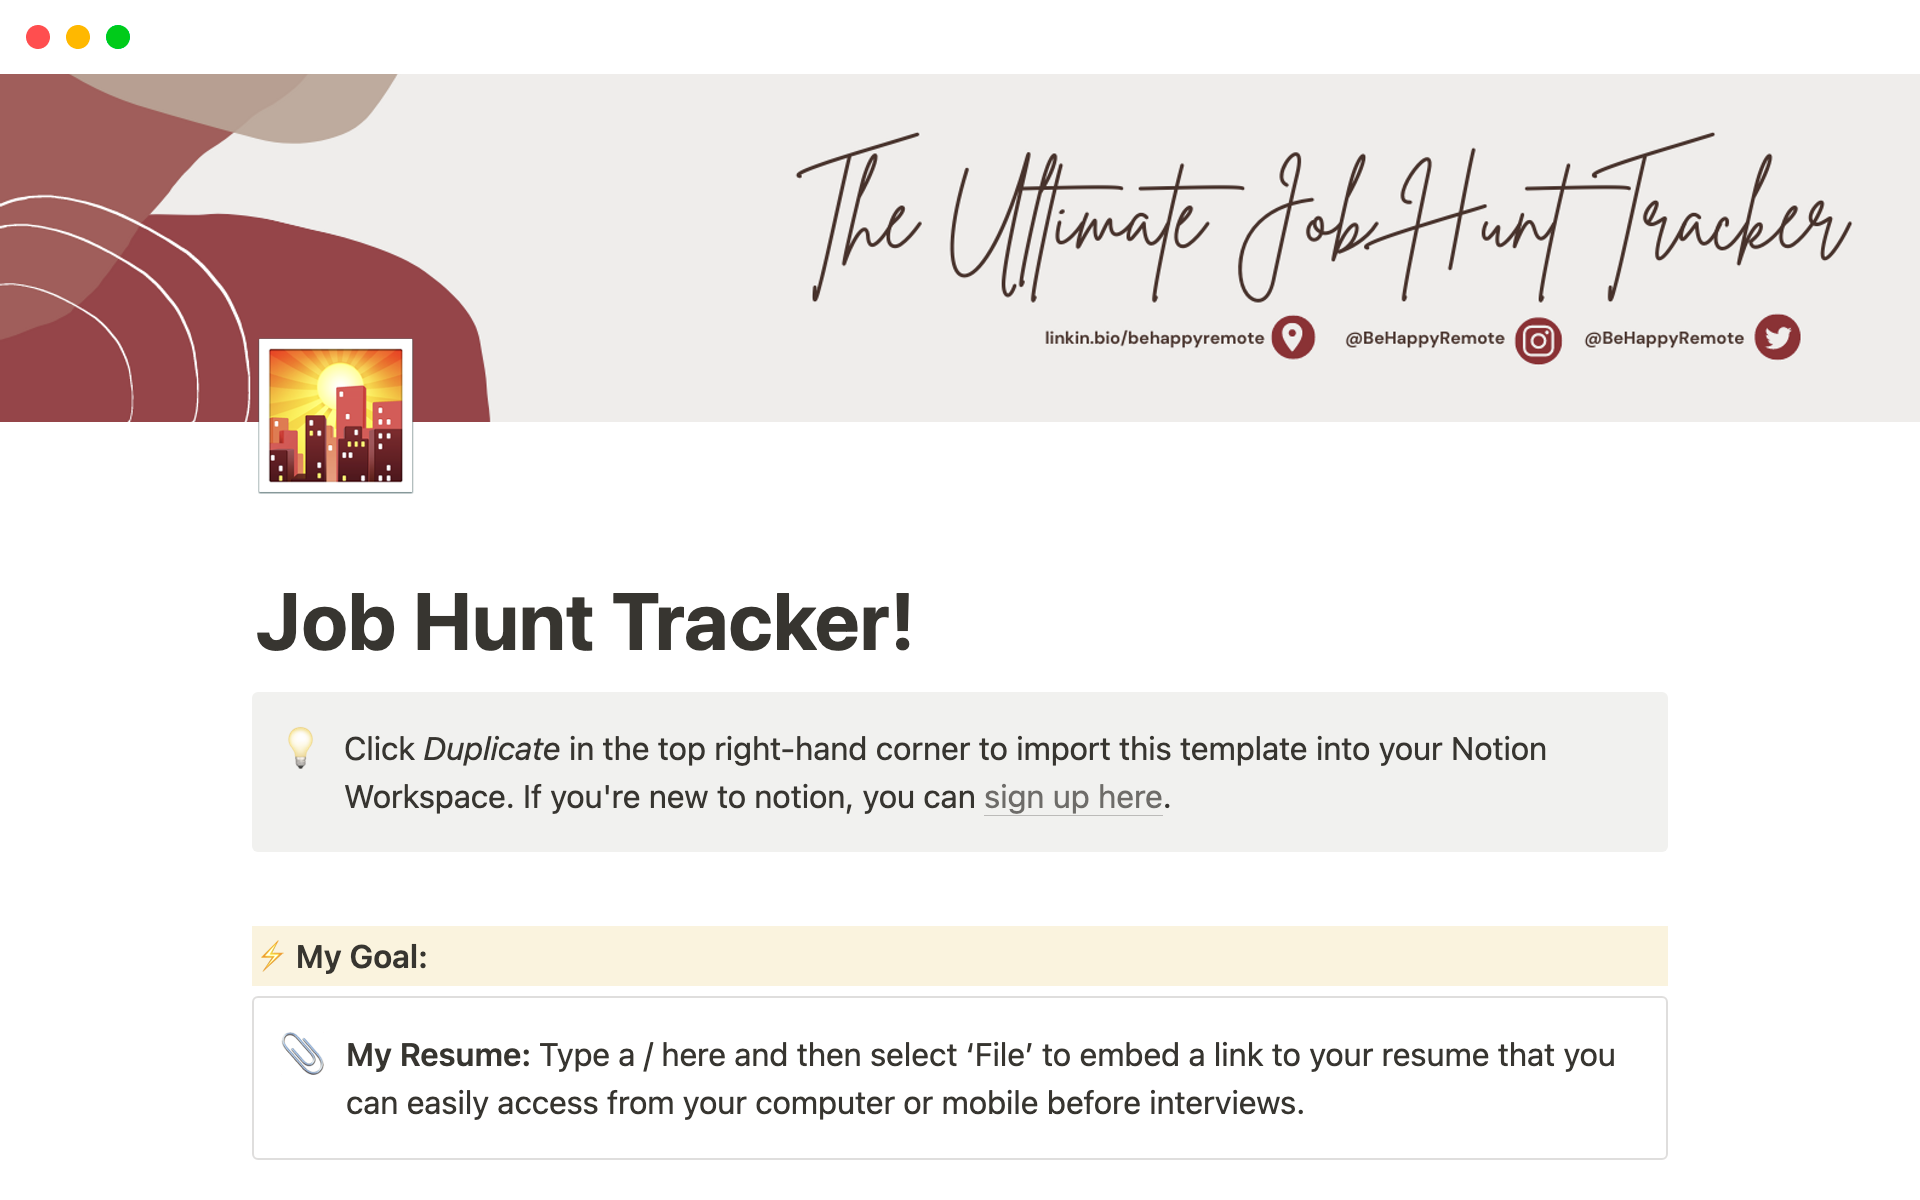 The Ultimate Job Hunt Tracker is a downloadable Notion template that provides a blueprint for job-hunting success.